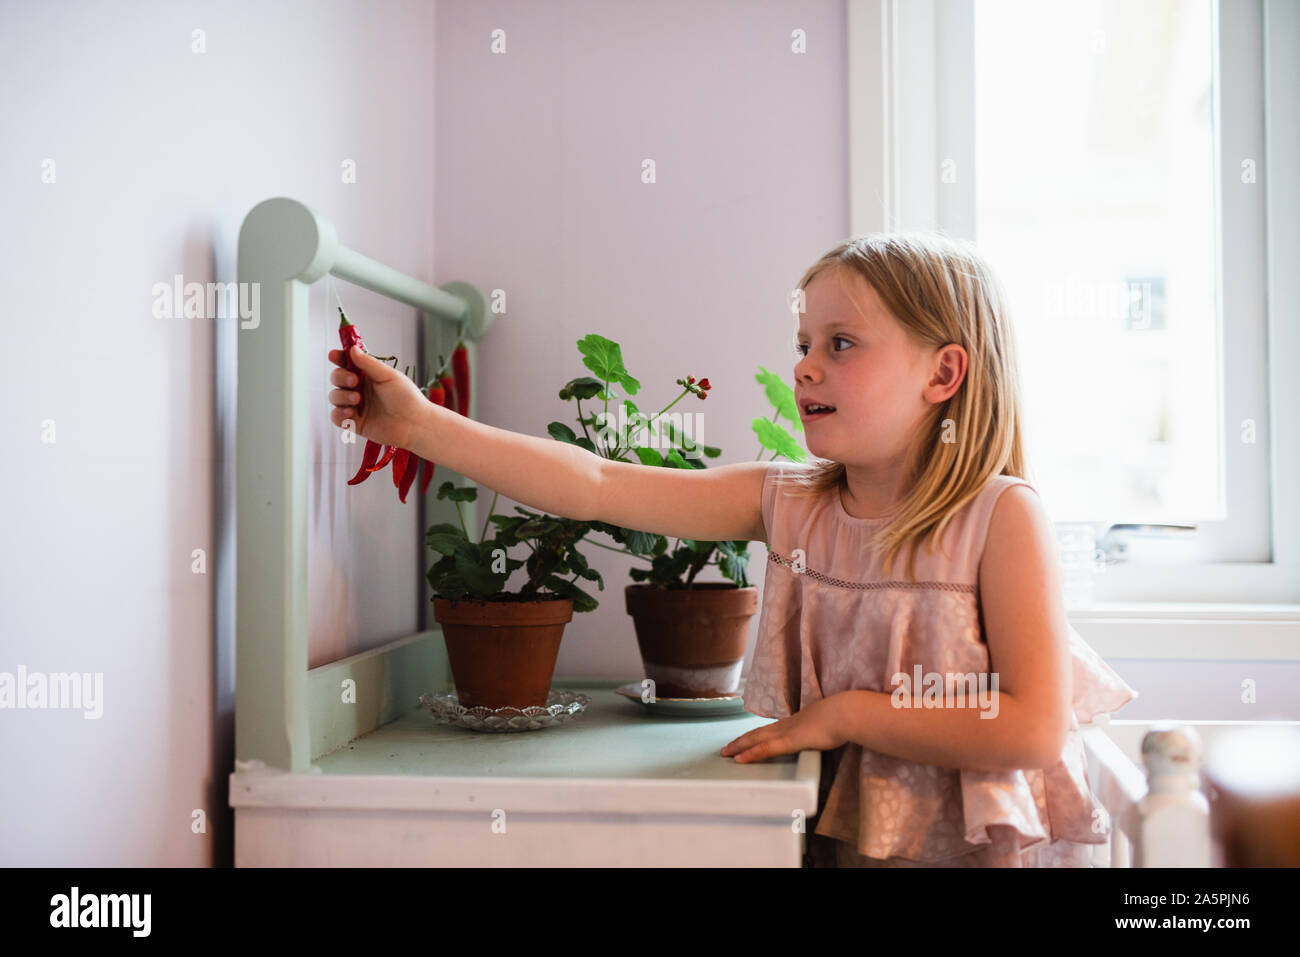 Girl at home Stock Photo